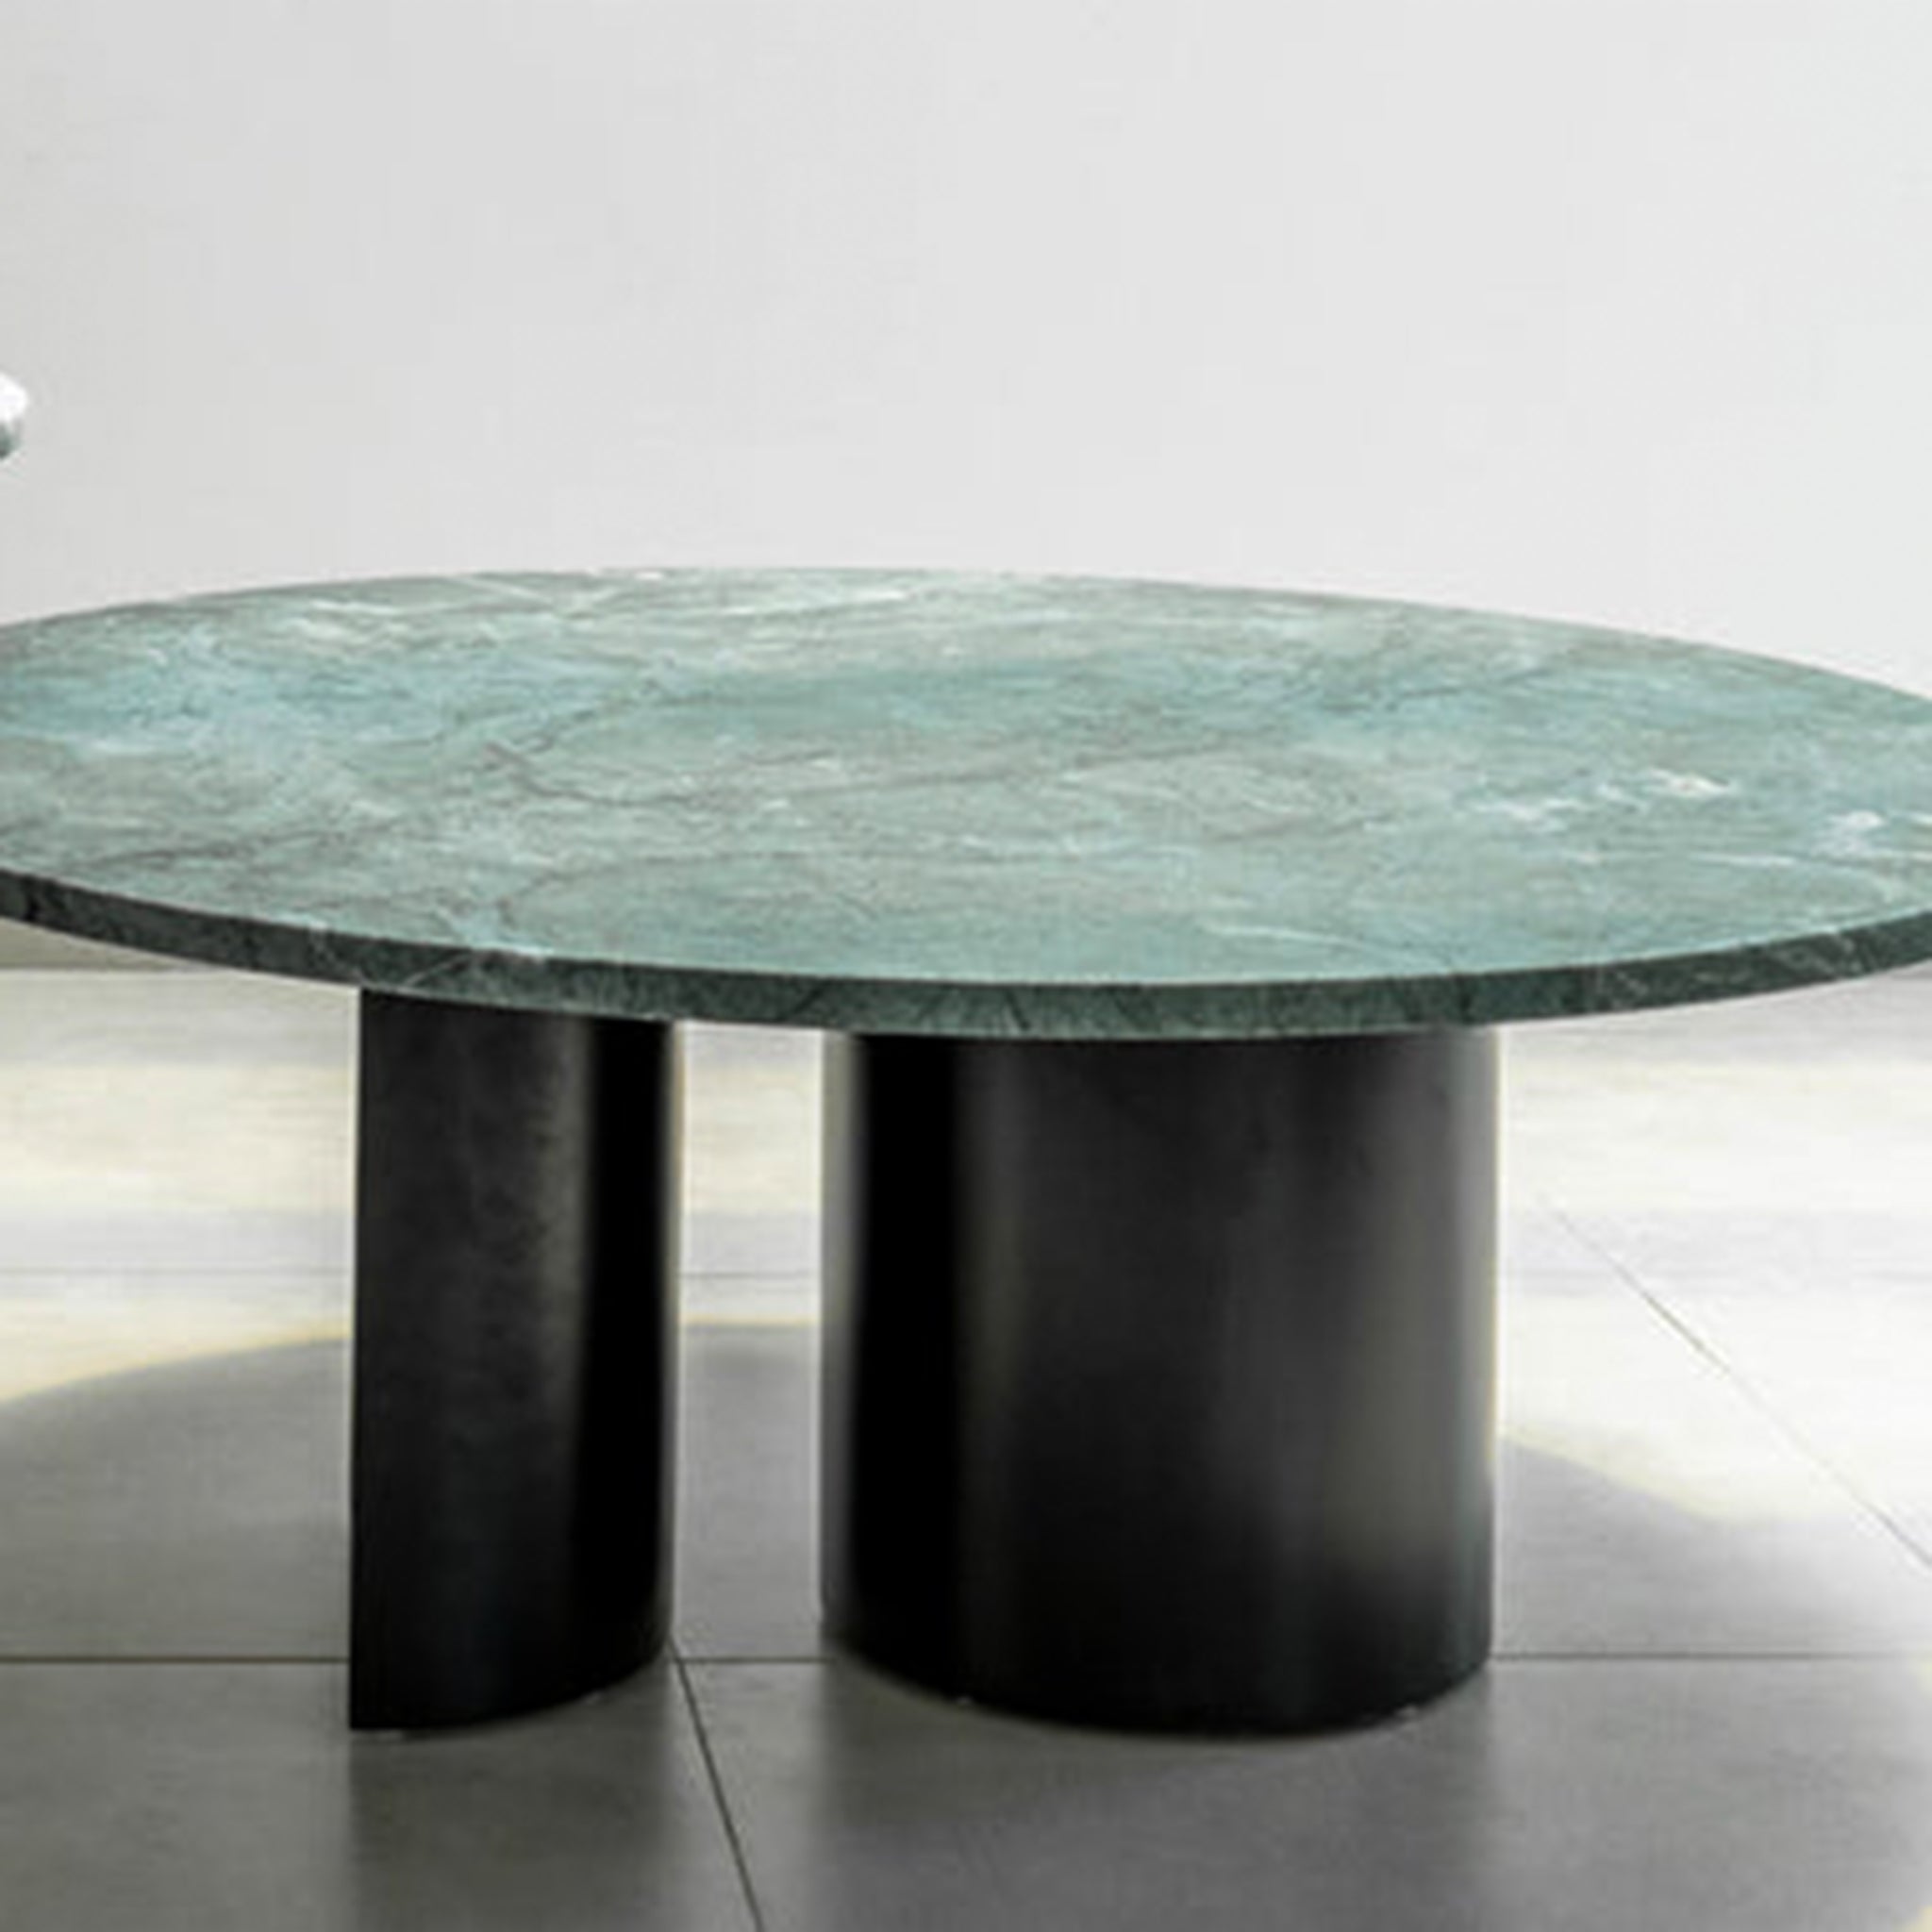 Honed Marble Table: Silky smooth finish adds elegance to any living space.